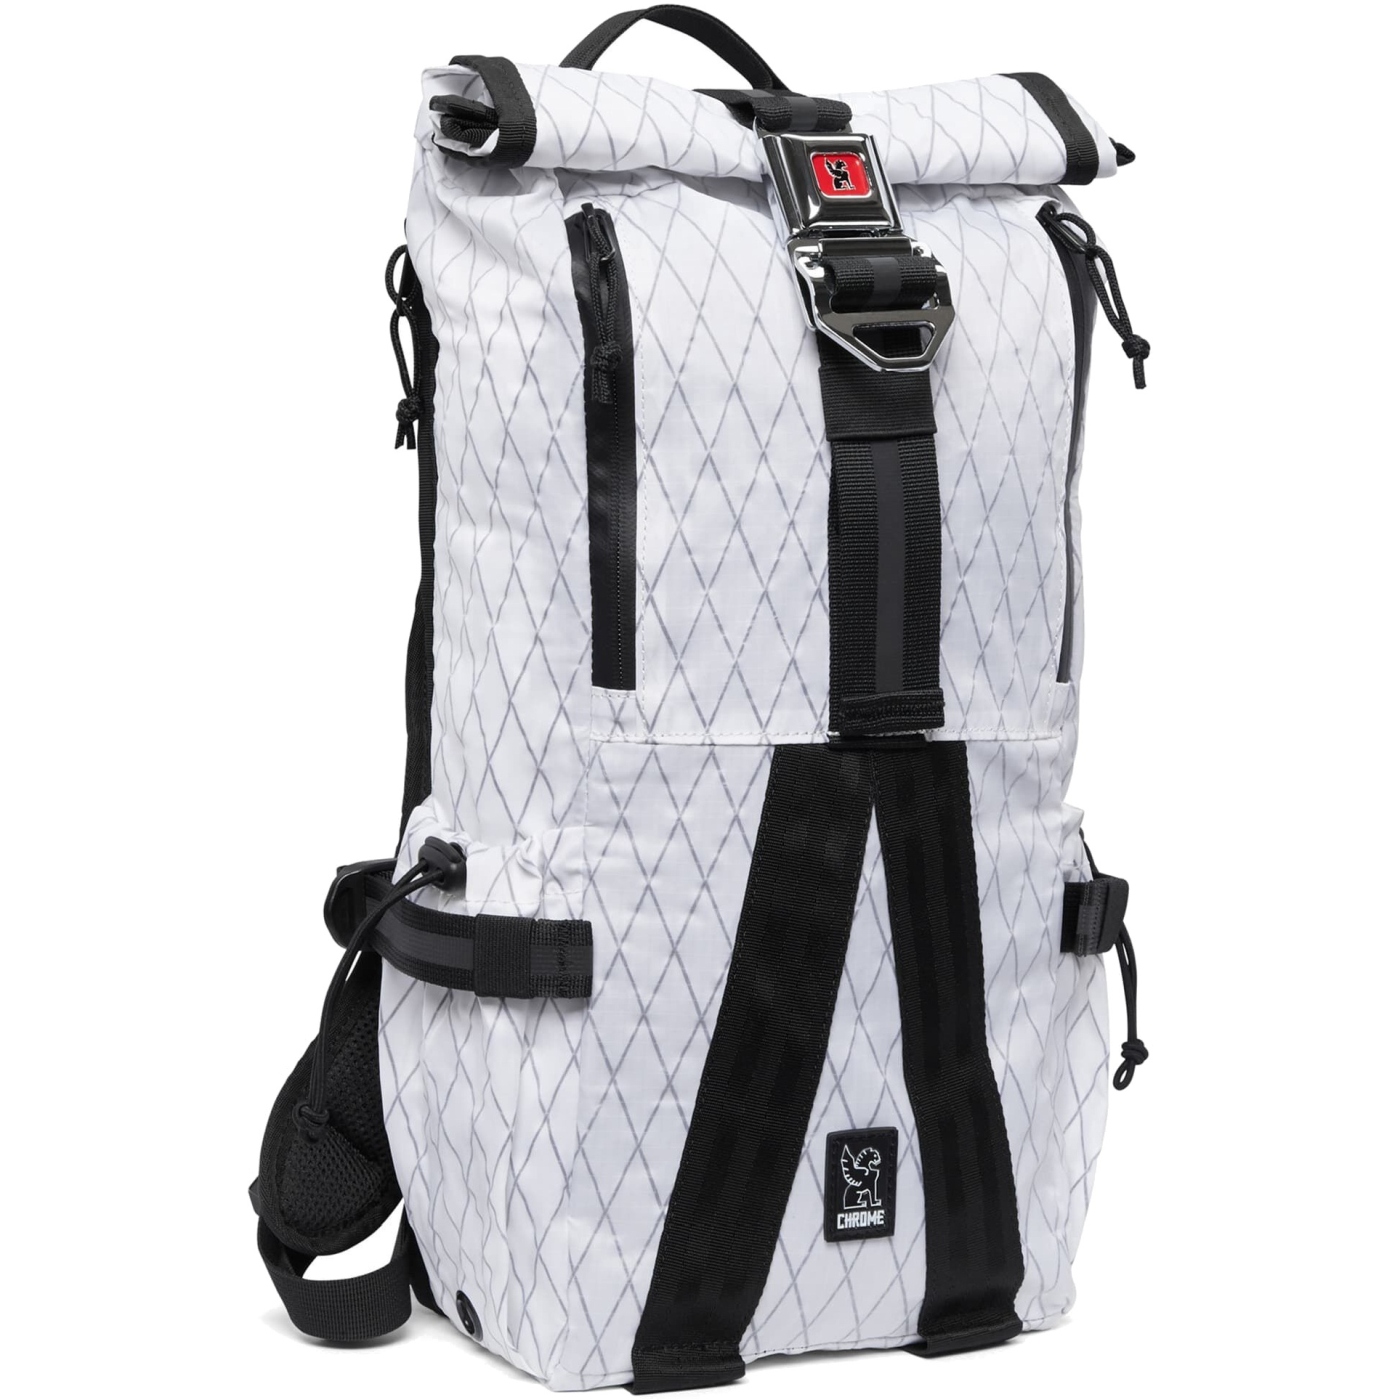 Image of CHROME Tensile Trail Hydro Pack - 16L Backpack - White